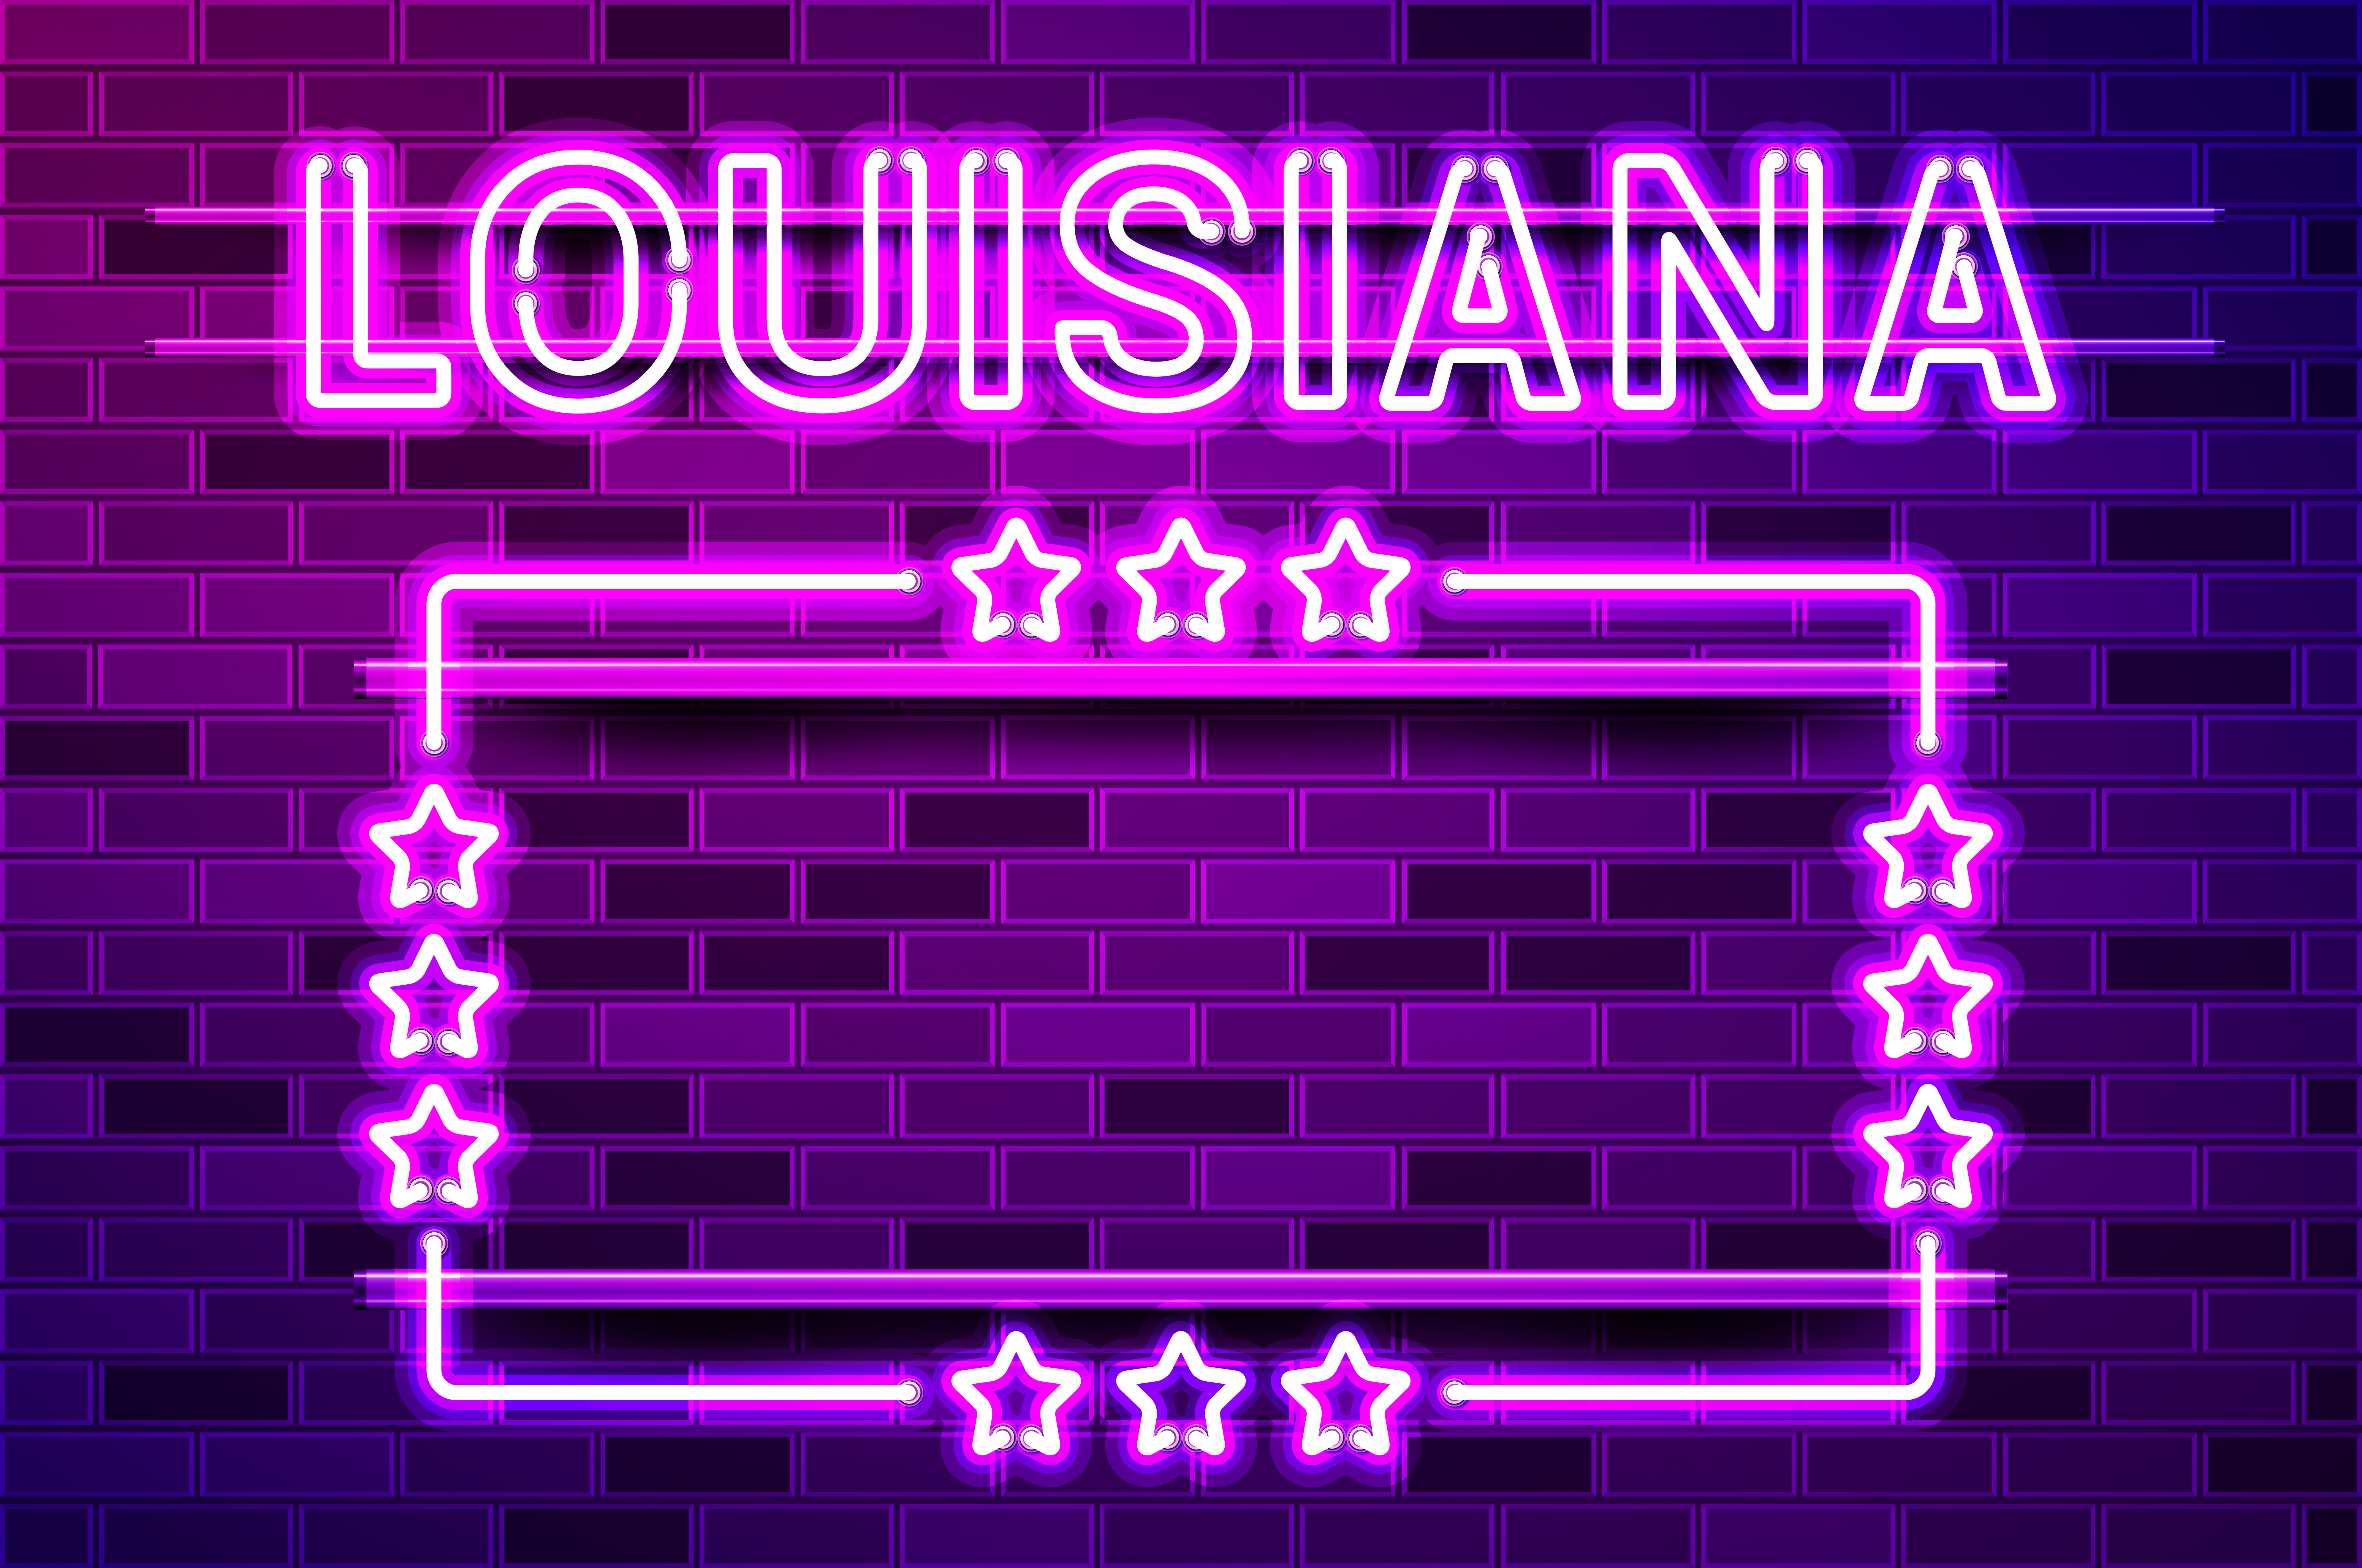 Louisiana US State glowing purple neon lettering and a rectangular frame with stars. Realistic vector illustration. Purple brick wall, violet glow, metal holders.. Louisiana US State glowing purple neon lettering and a rectangular frame with stars